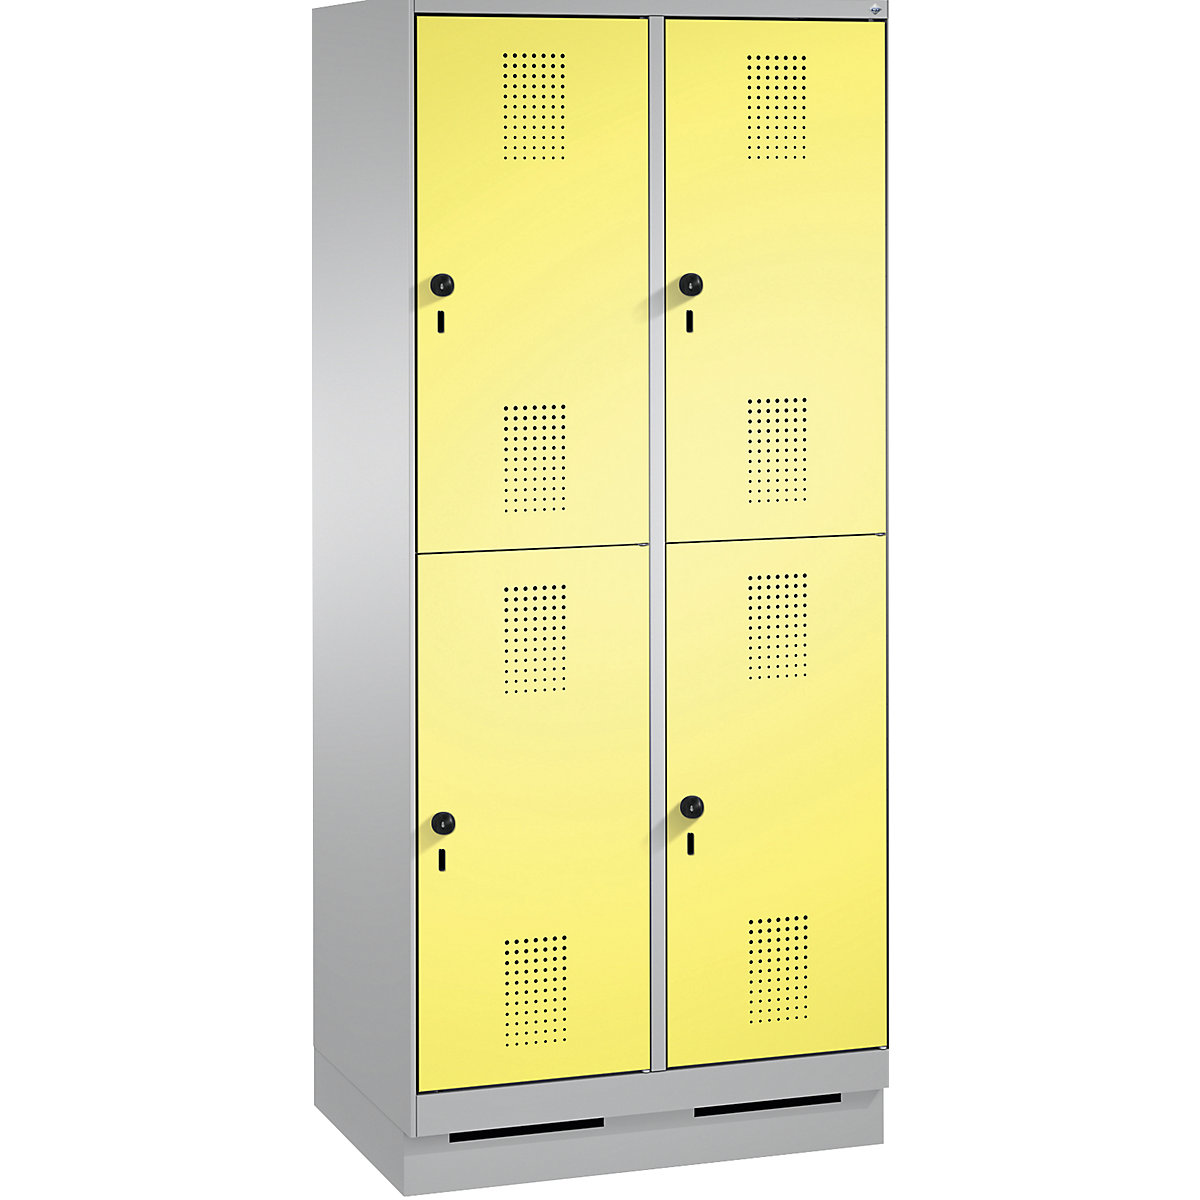 EVOLO cloakroom locker, double tier, with plinth – C+P, 2 compartments, 2 shelf compartments each, compartment width 400 mm, white aluminium / sulphur yellow-5